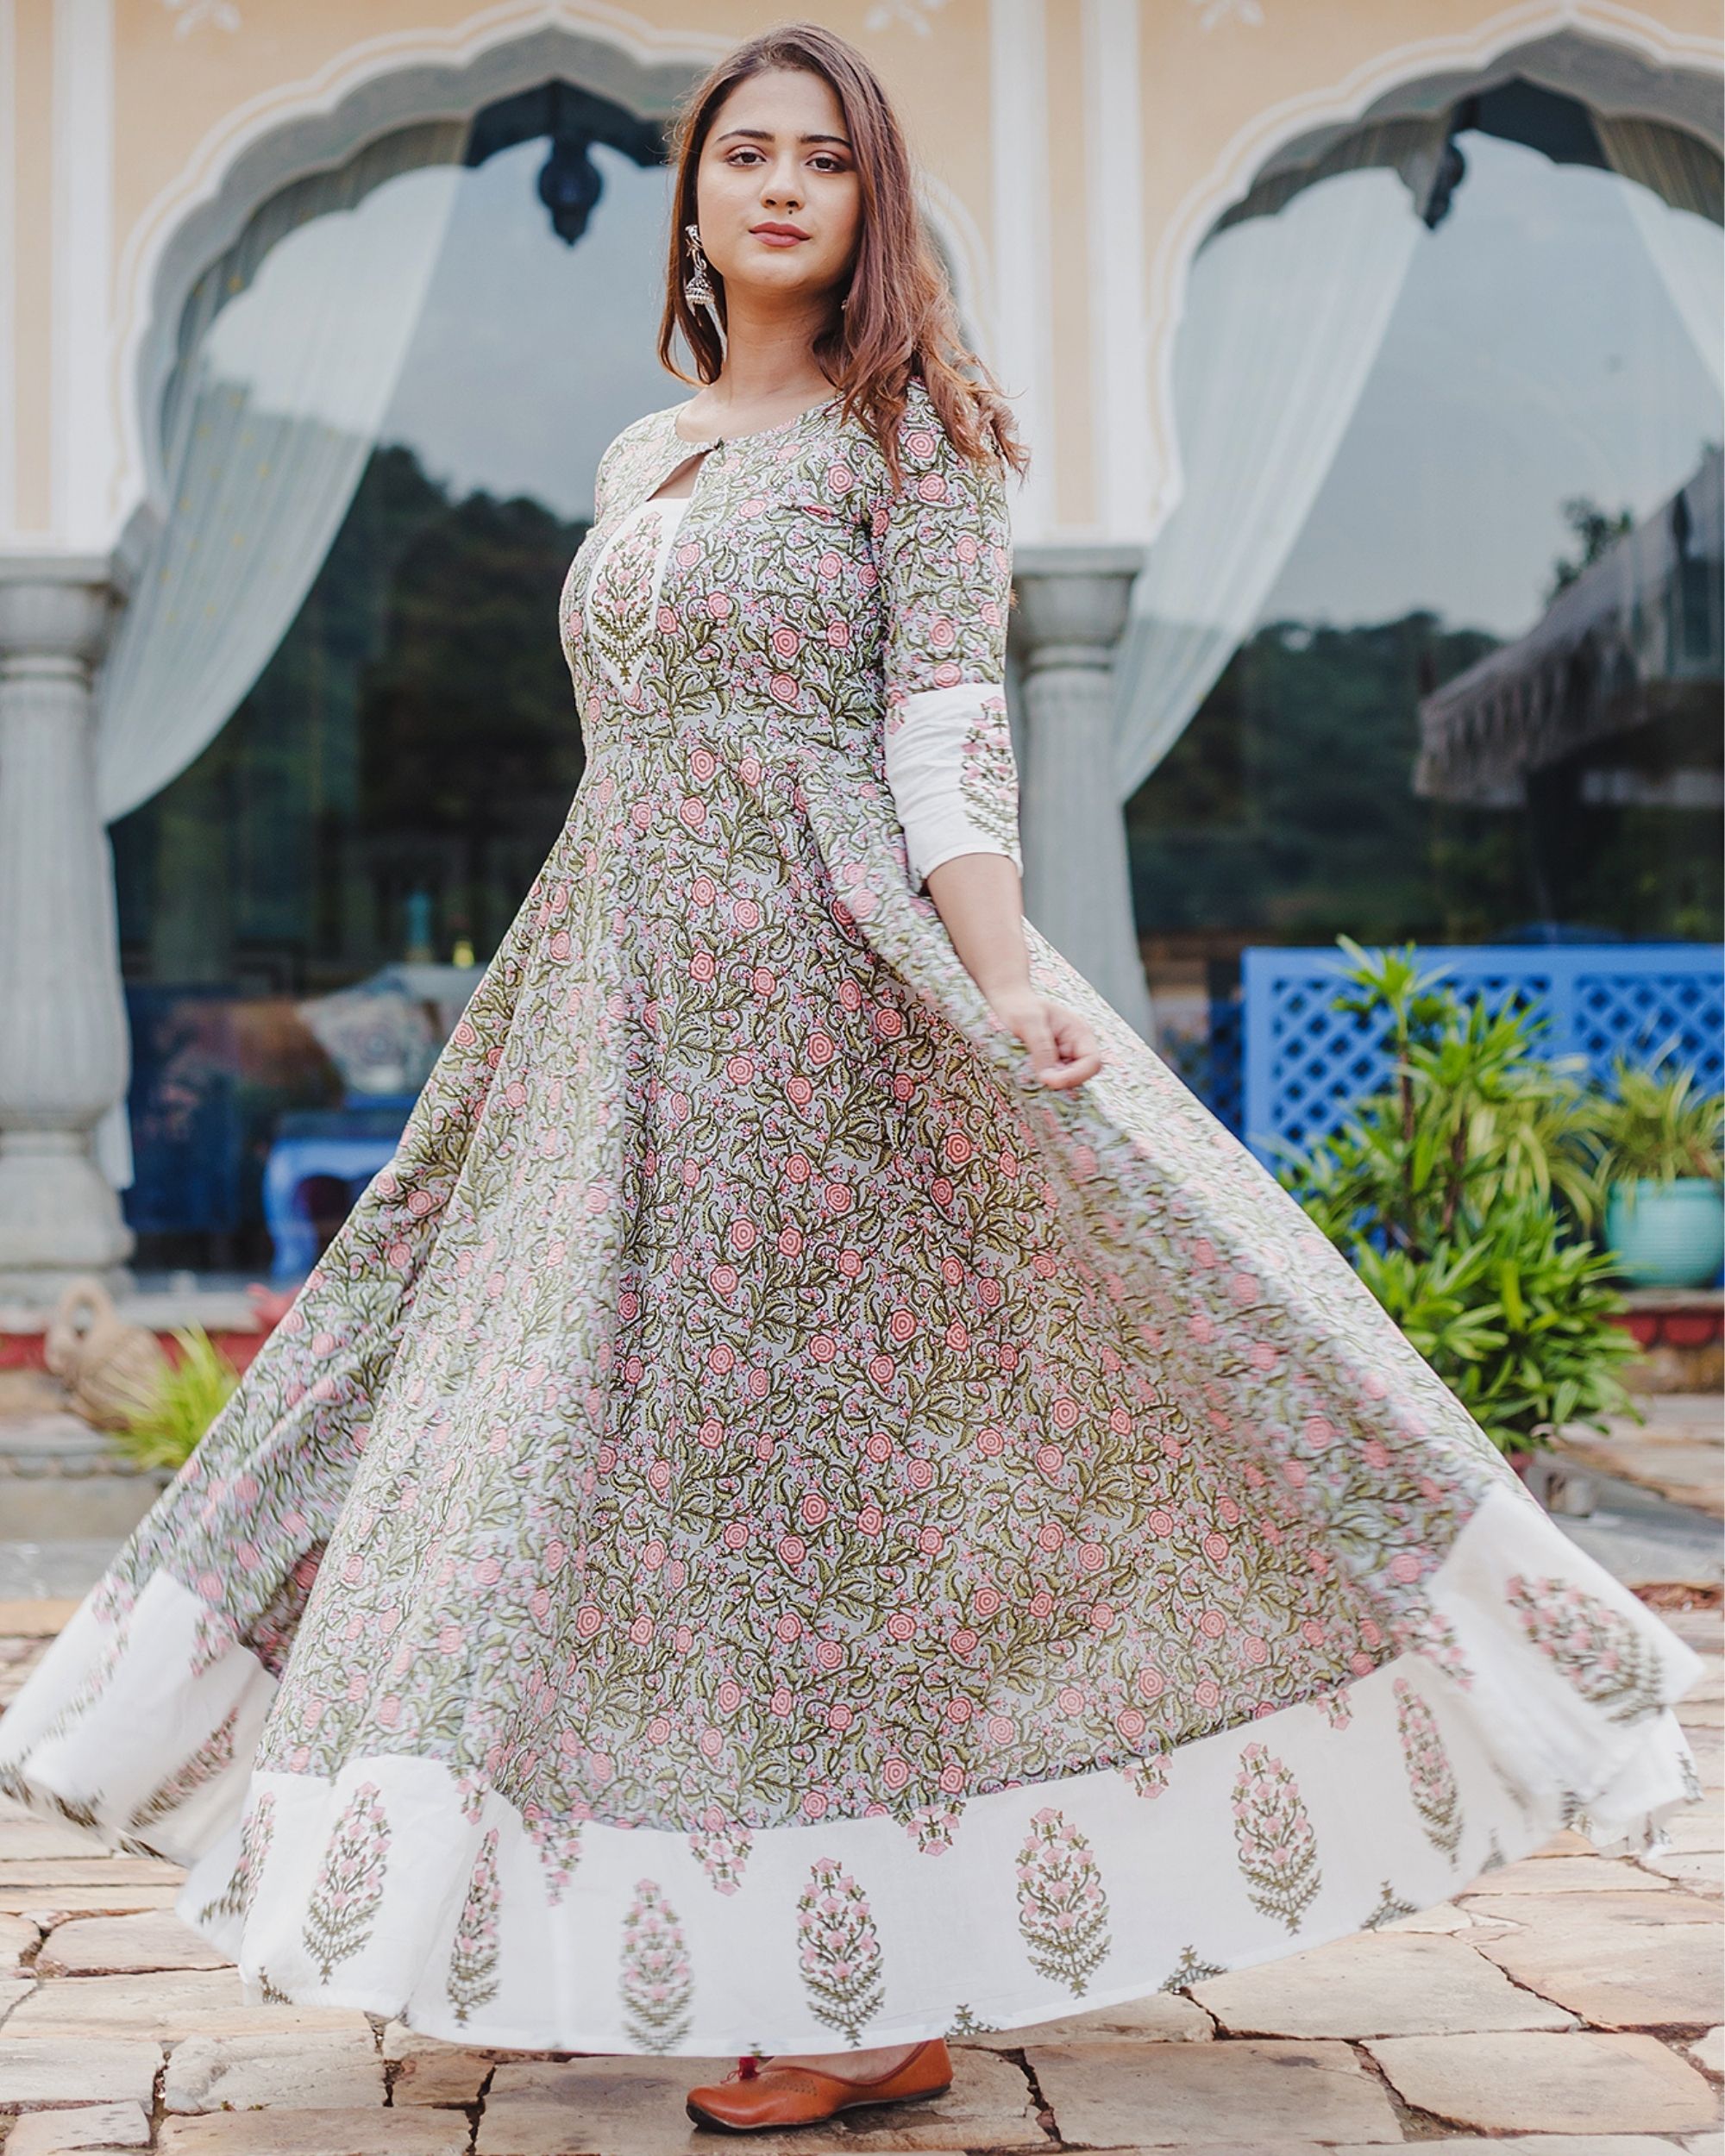 Green and pink floral printed mughal dress